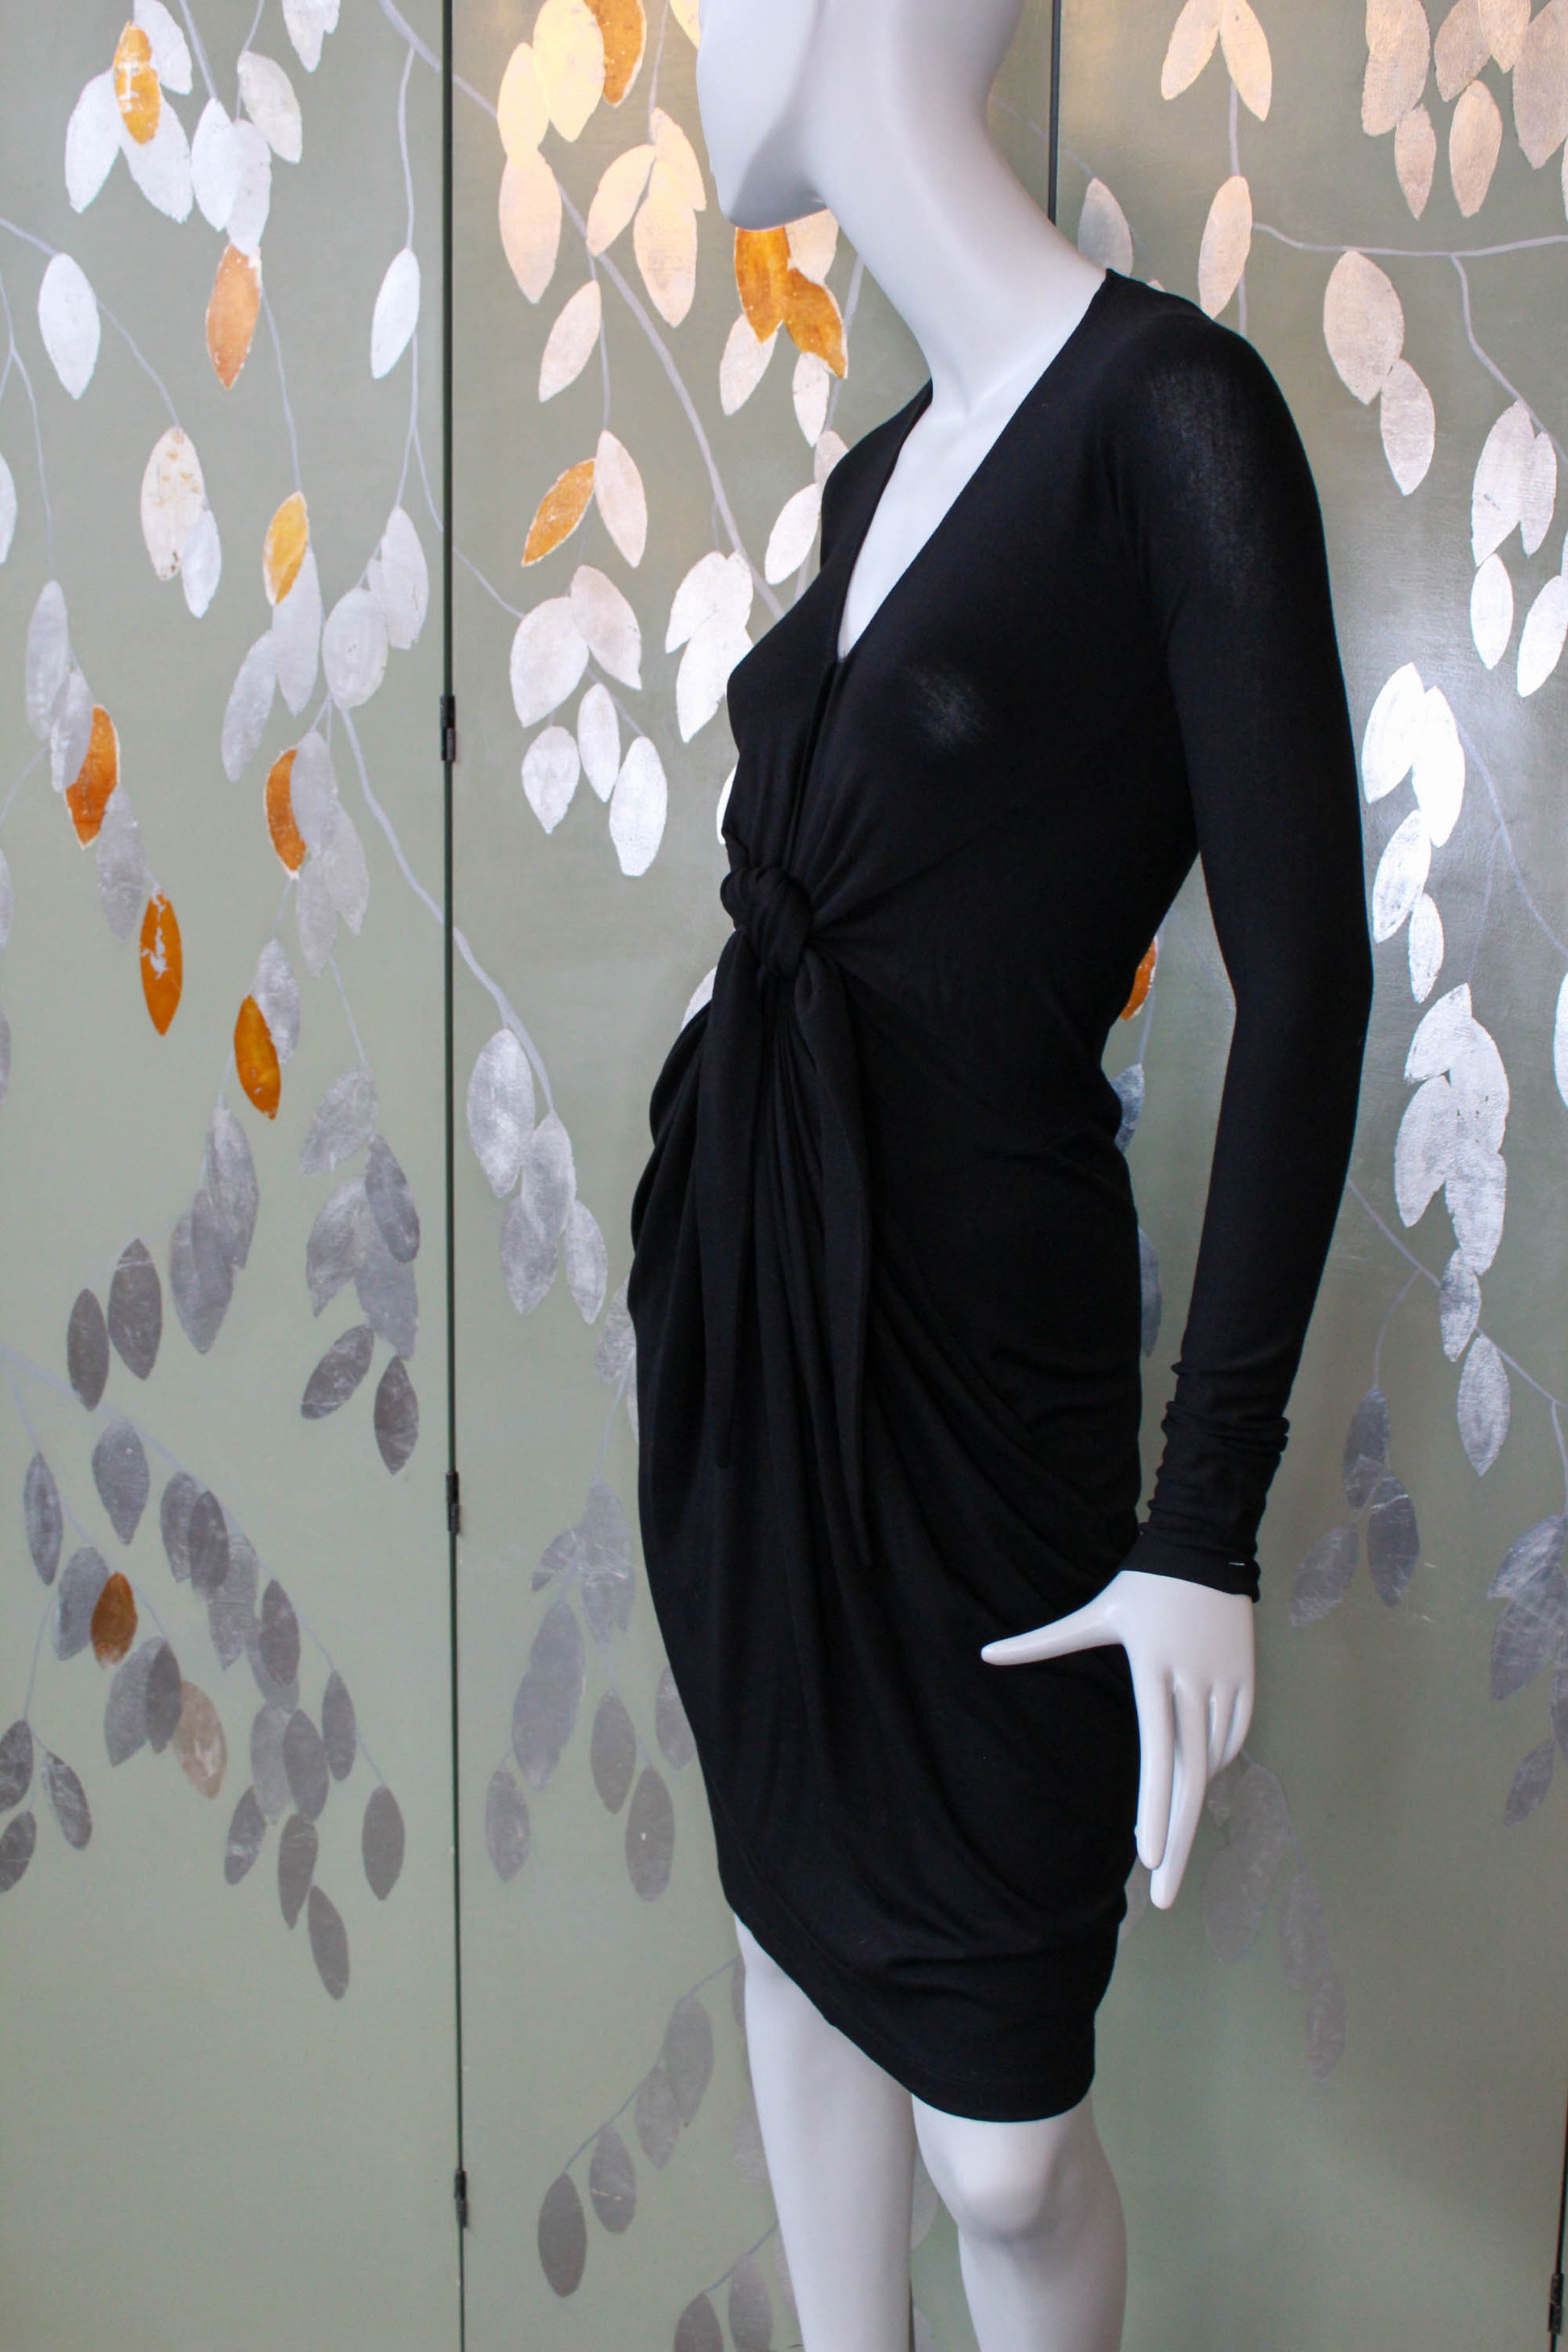 2000s DKNY donna karan new york black label wool blend jersey spandex dress with long sleeves, tie at centre front waist, deep v neck, holiday new years eve party dress